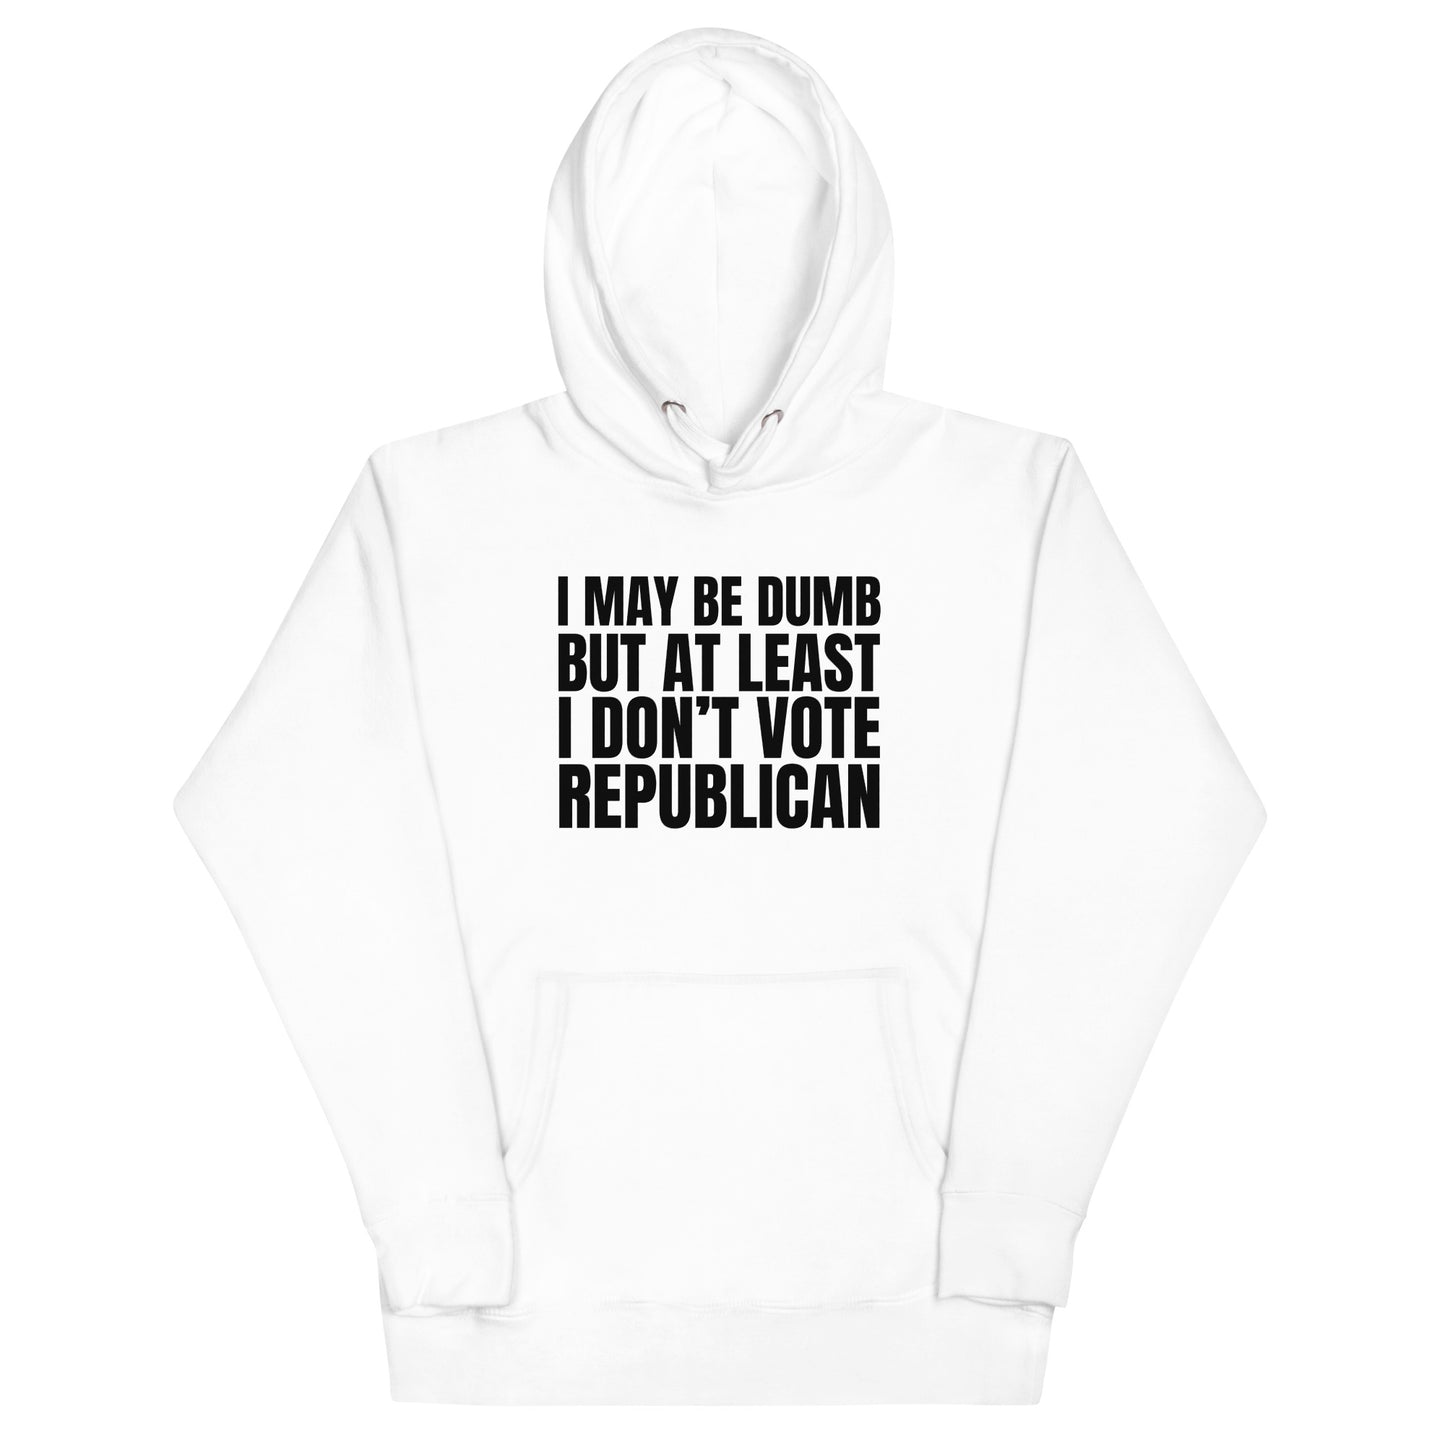 I May Be Dumb But At Least I Don't Vote Republican Unisex Hoodie